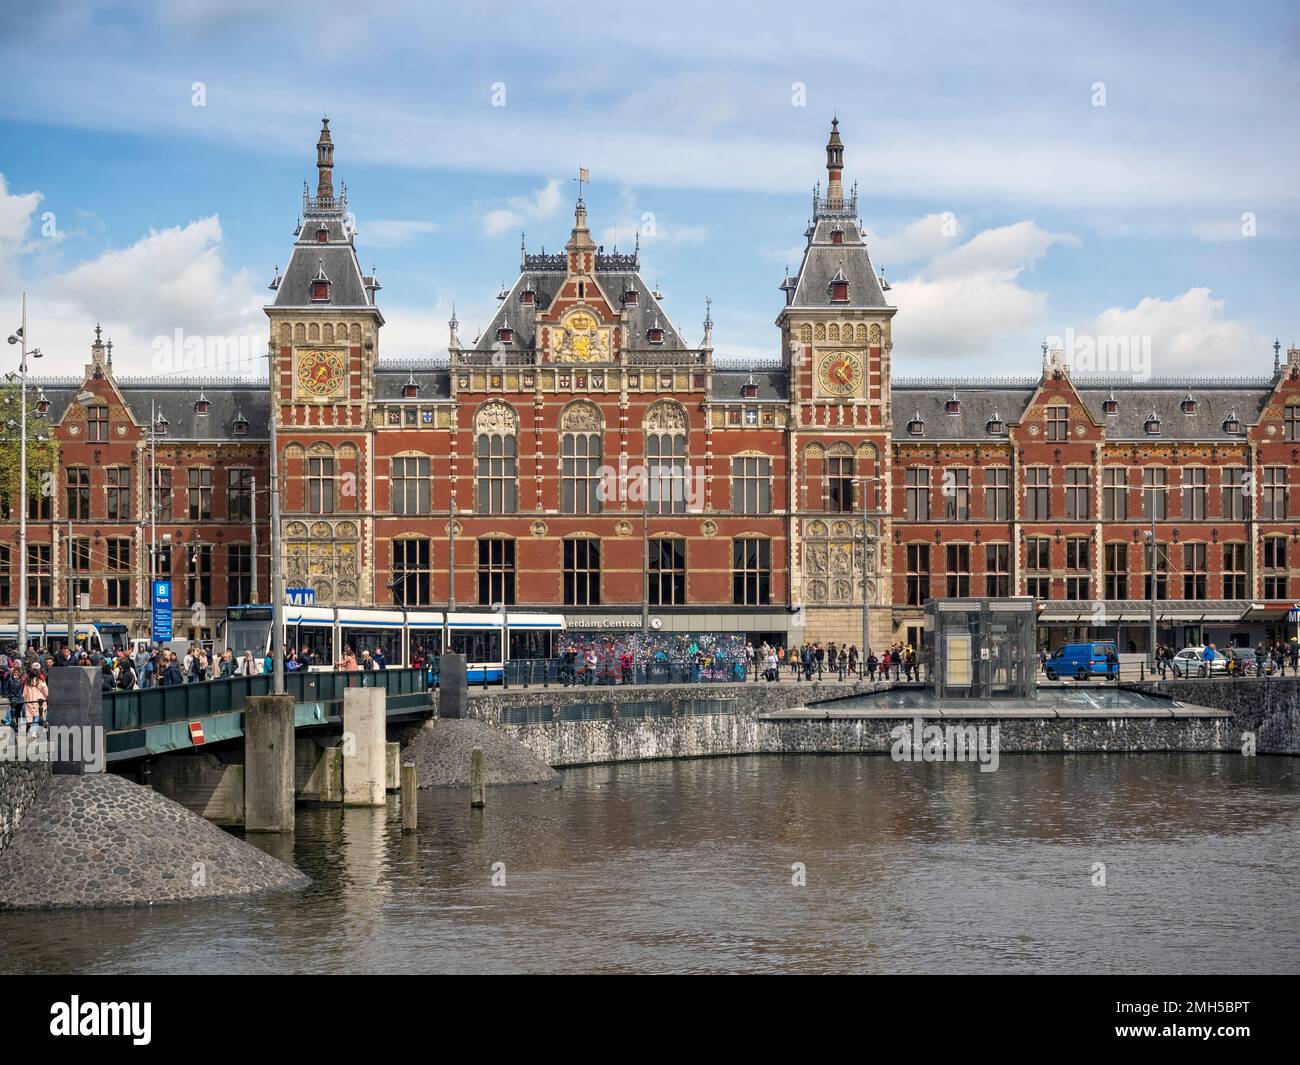 AMSTERDAM, NETHERLANDS - MAY 01, 2018:  Exterior view of Centraal Station seen across a canal Stock Photo